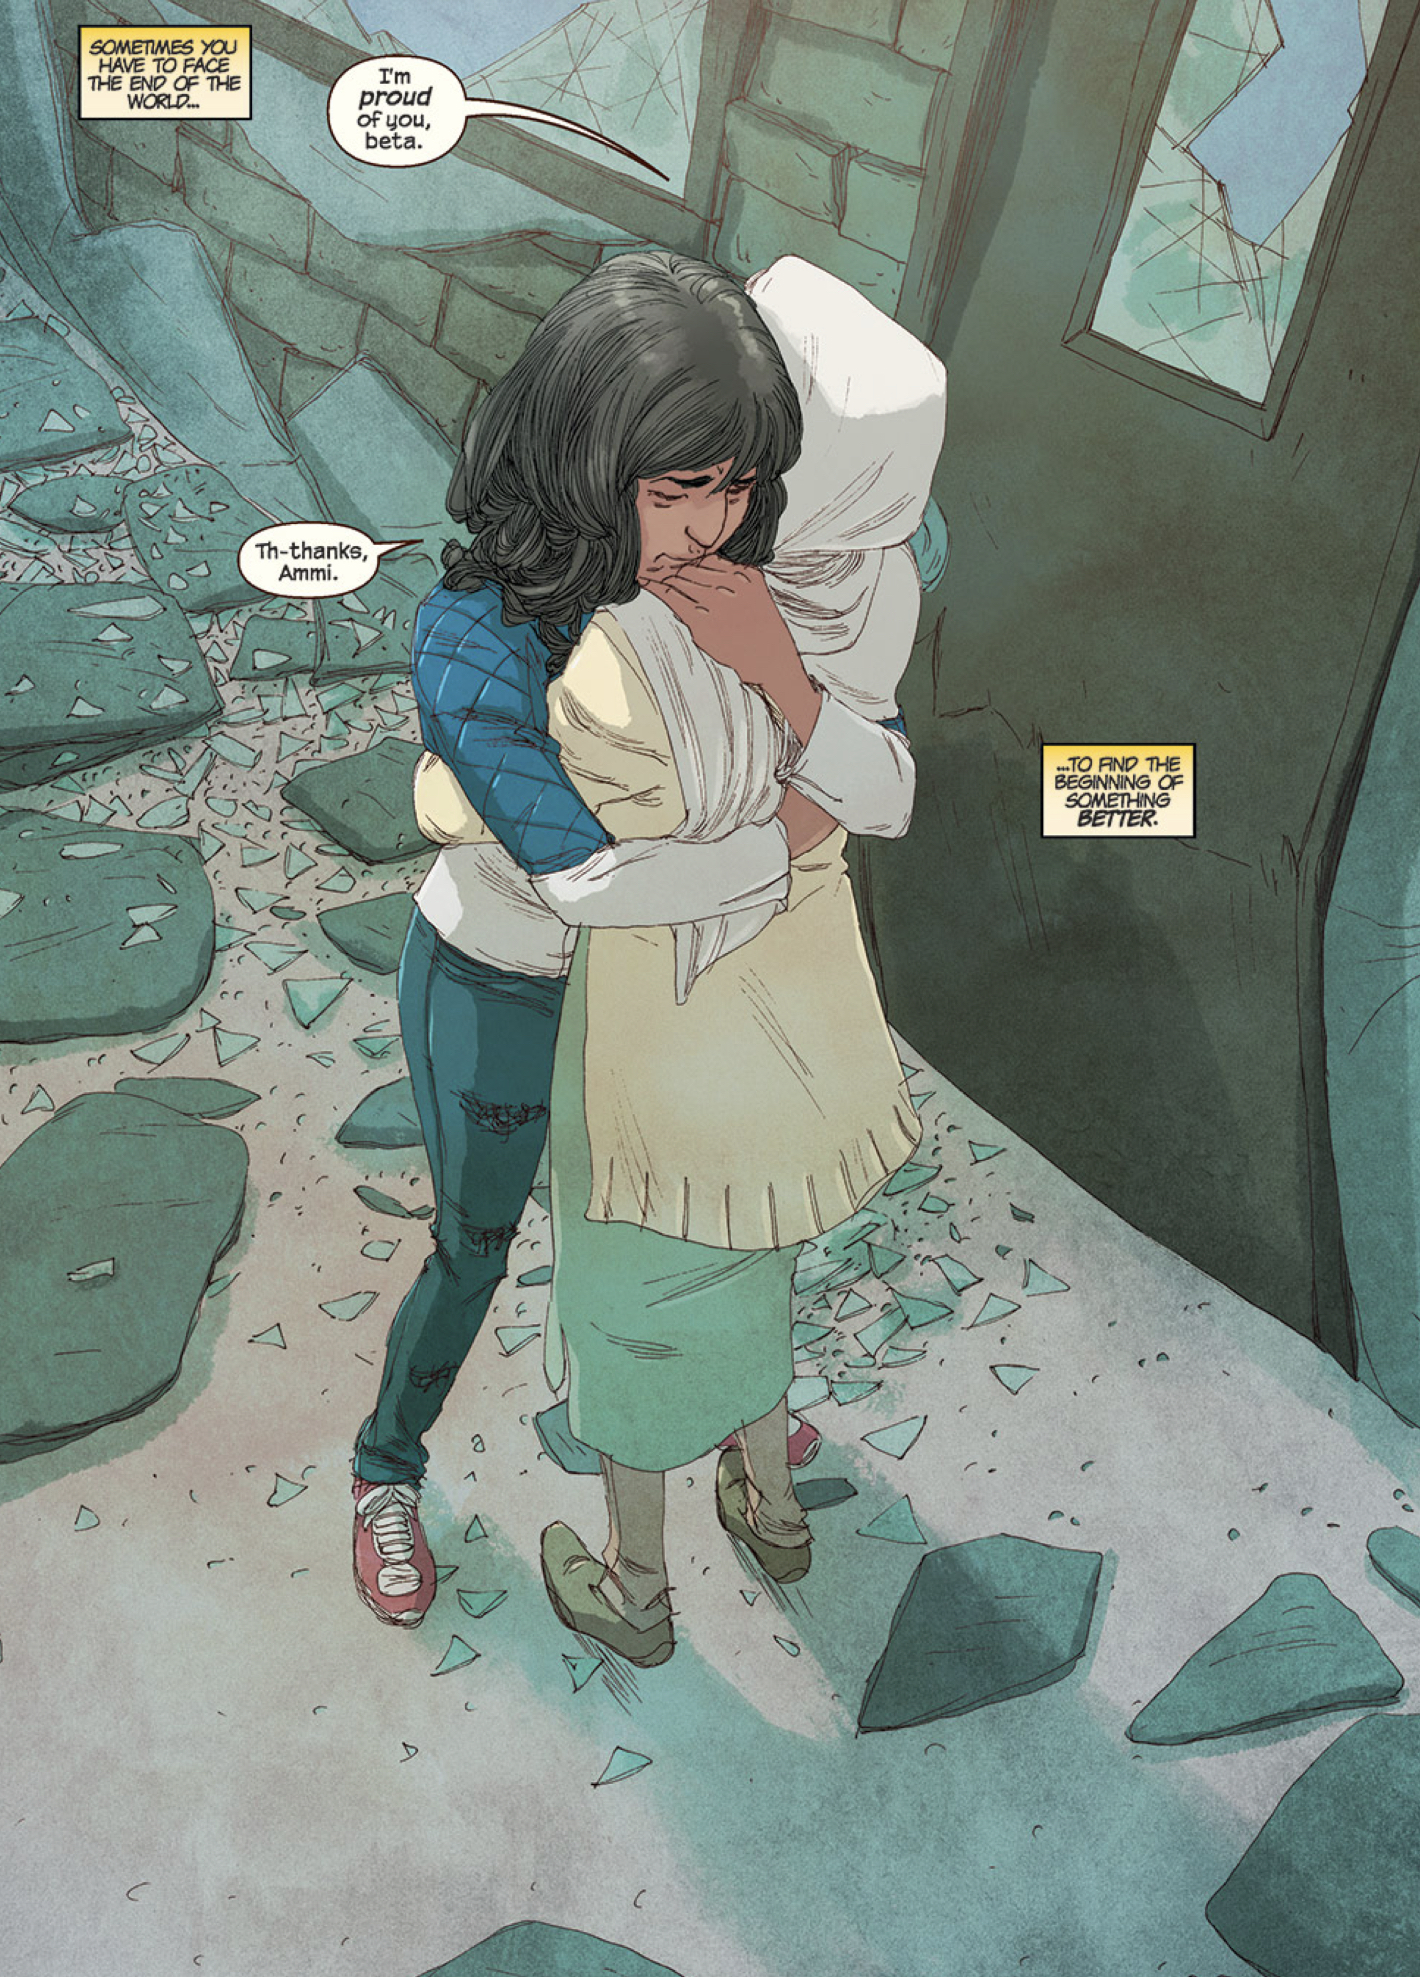 Kamala sharing a sweet moment with her mother Muneeba at the end of the world. Ms Marvel, vol. 3, issue #19